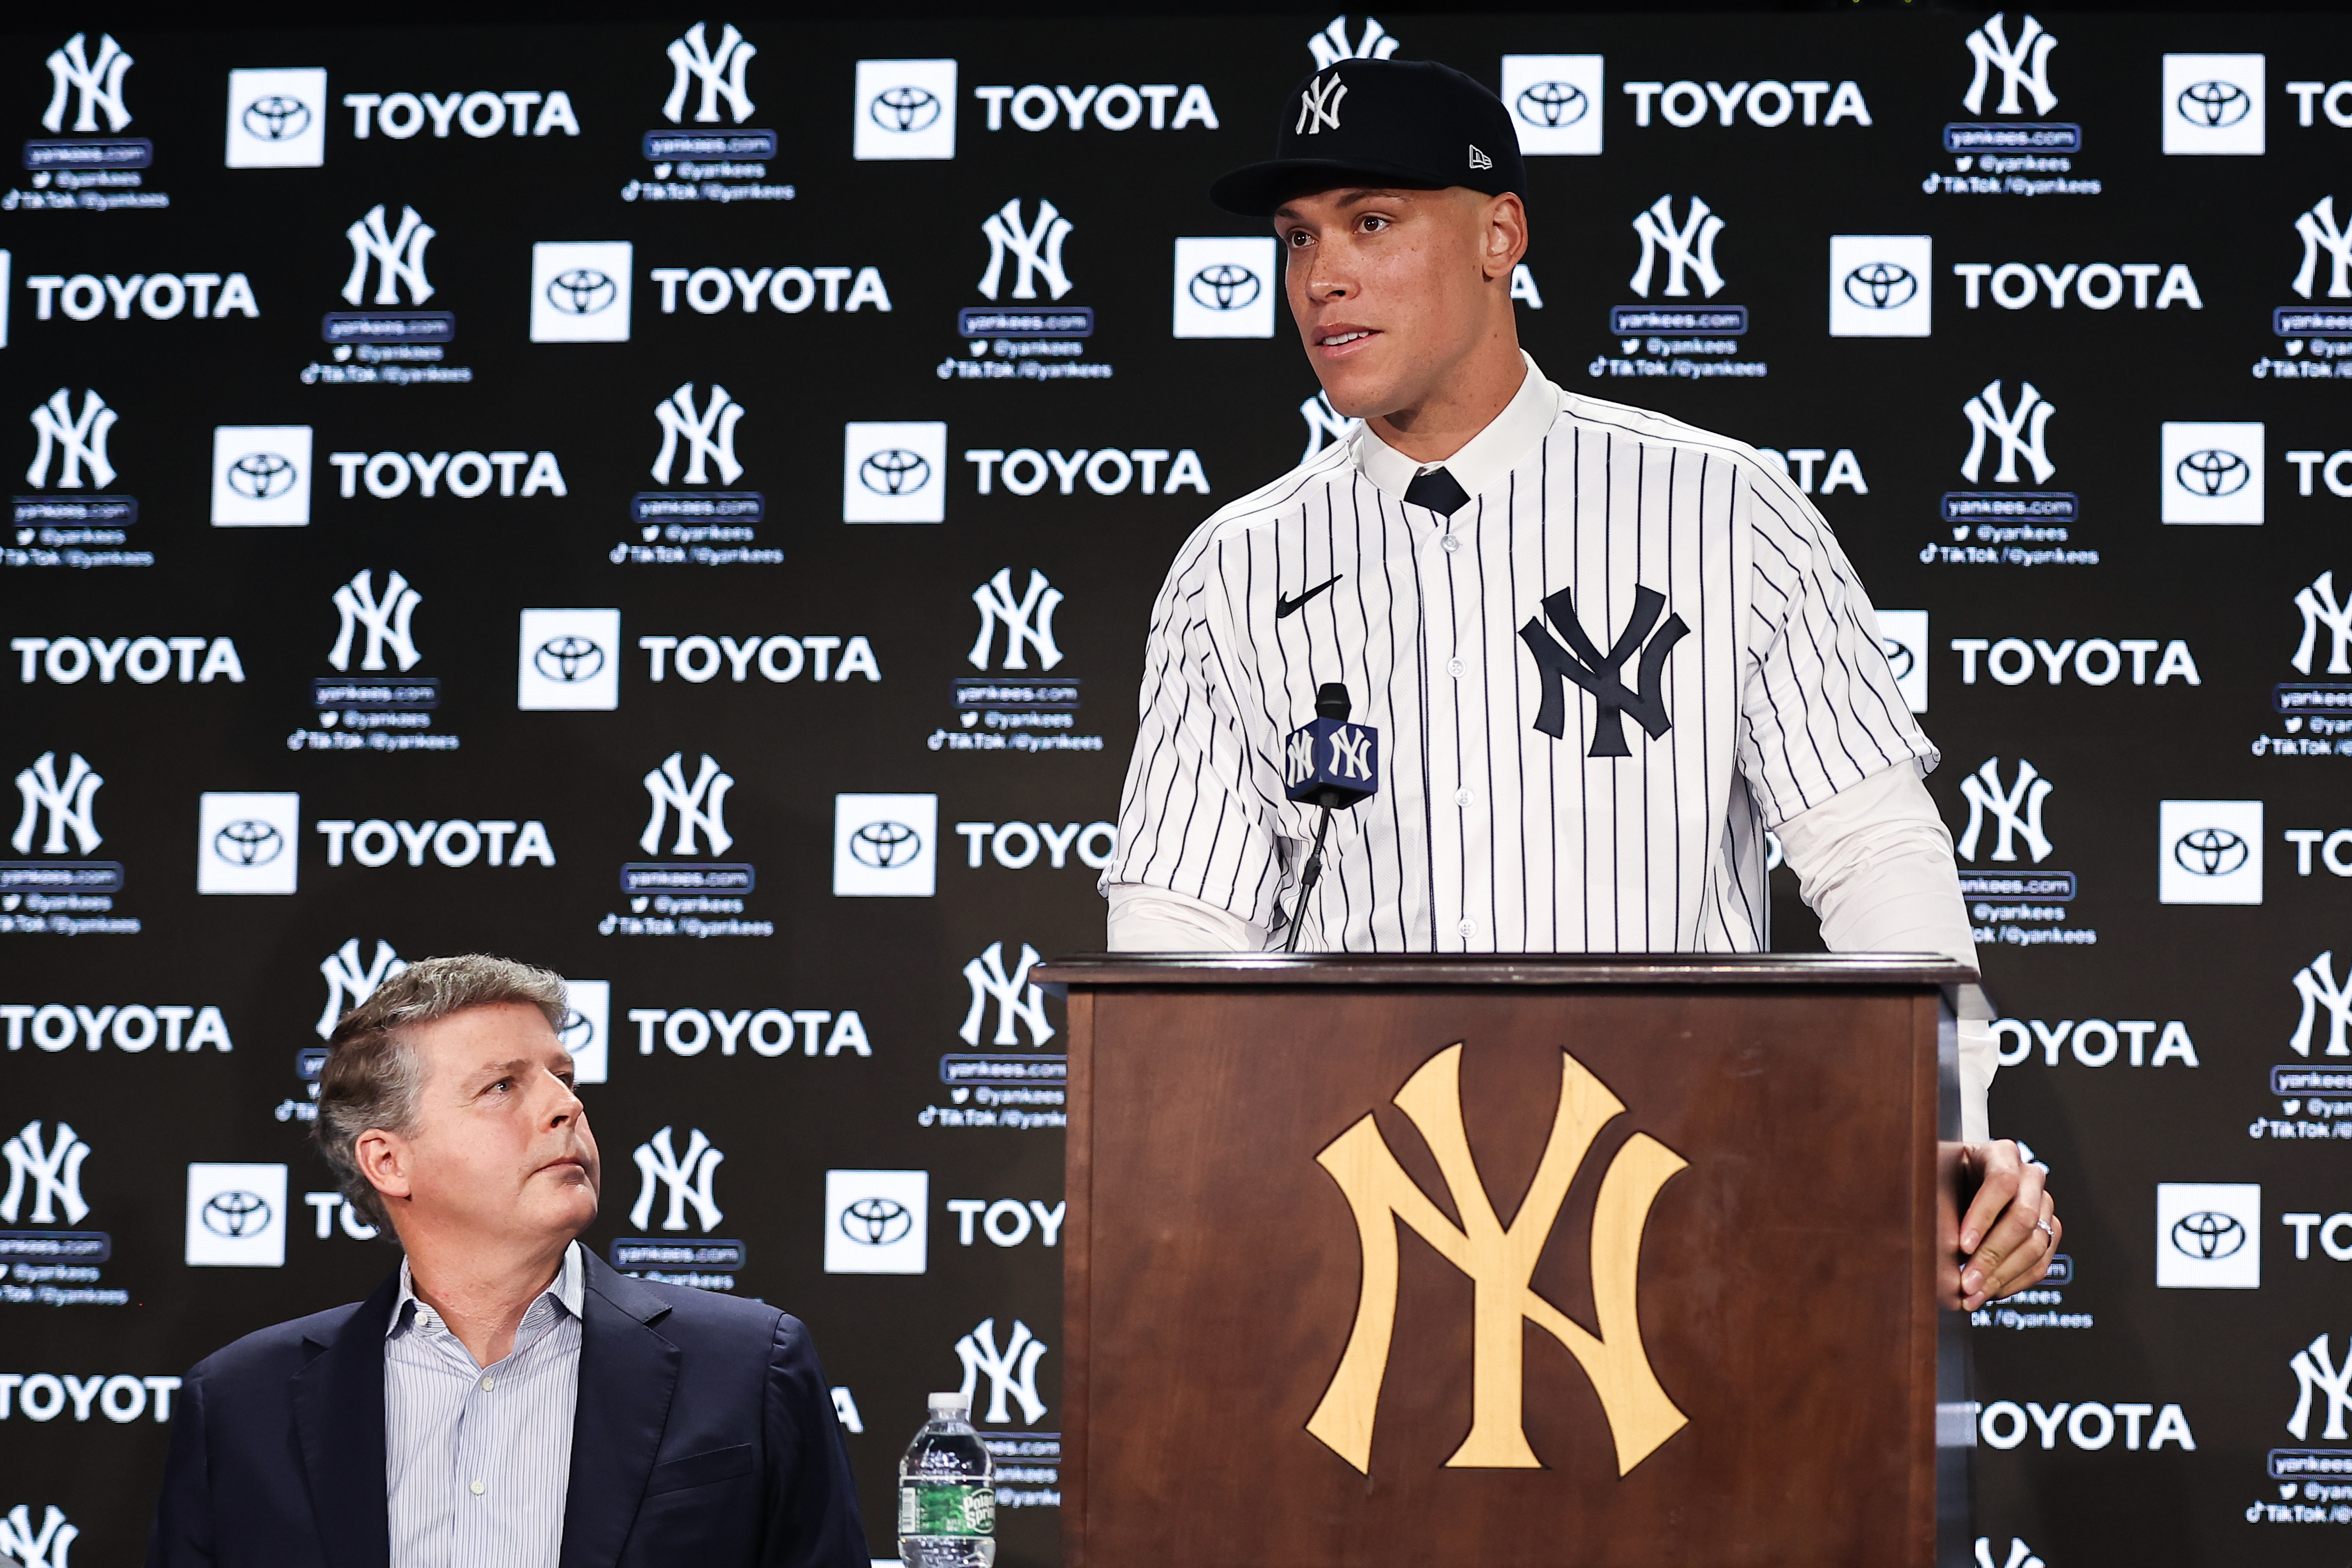 Aaron Judge becomes Yankees captain, with Derek Jeter at side - The Boston  Globe